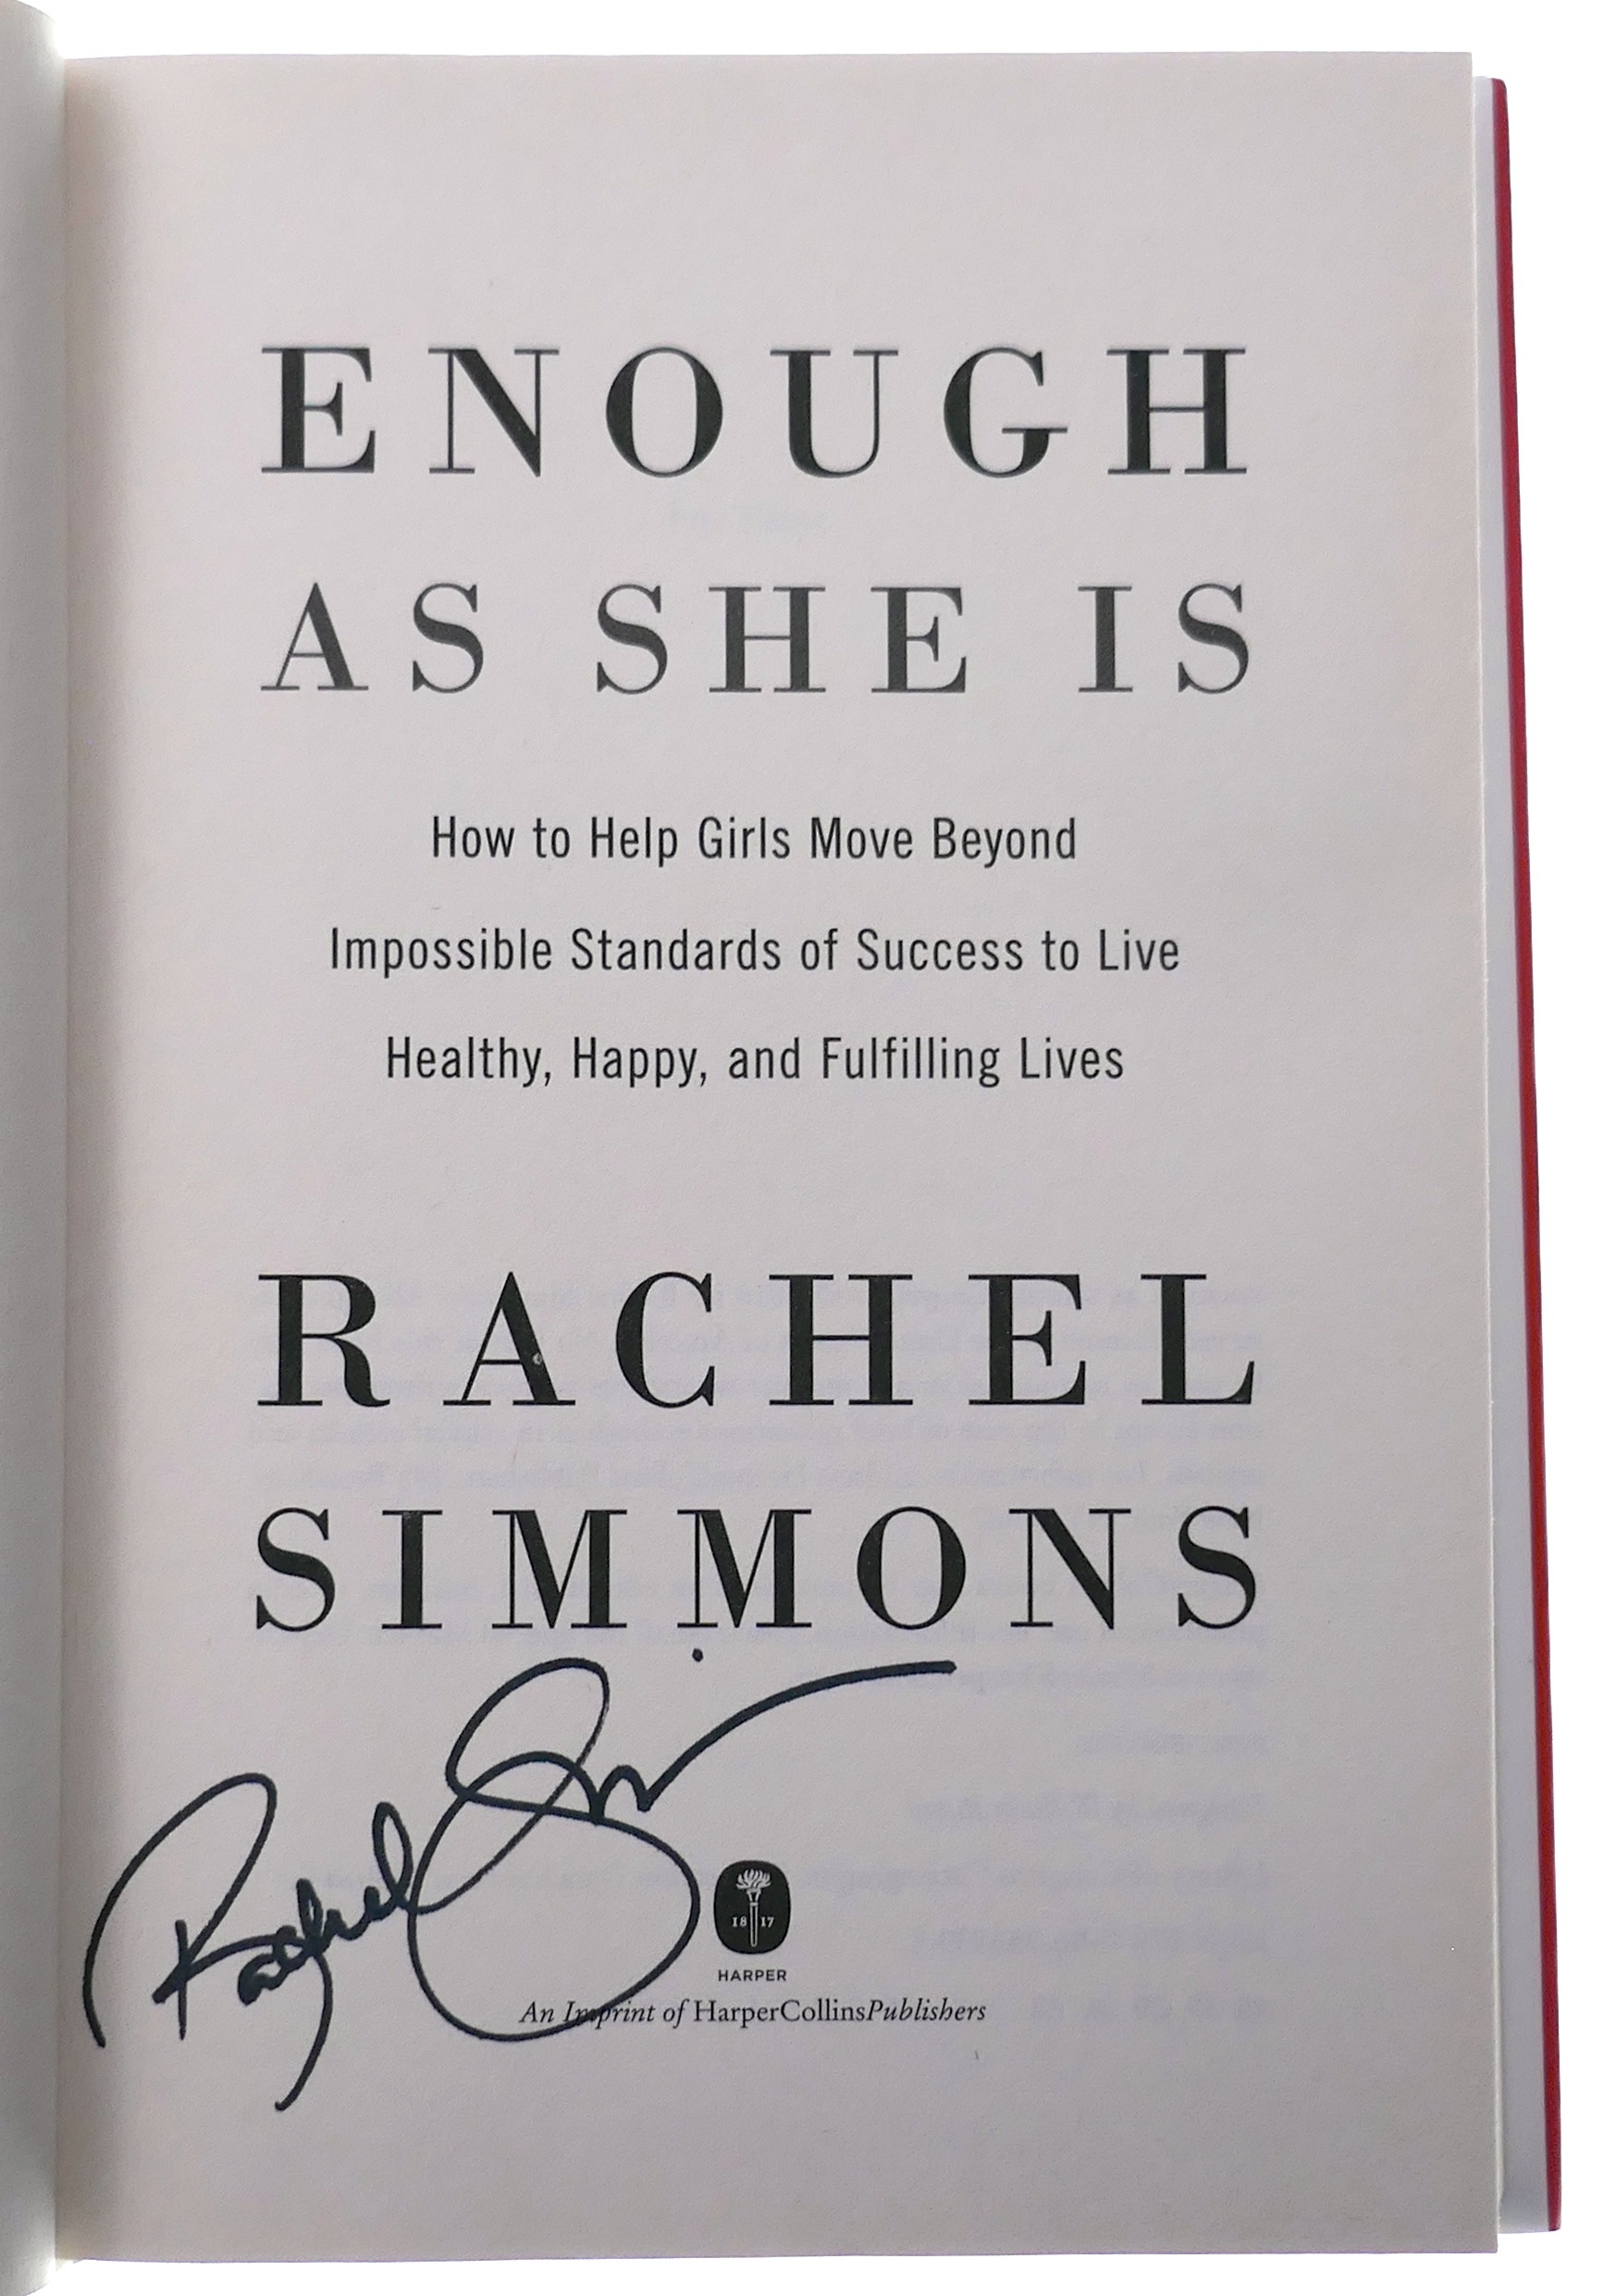 Simmons,　Signed　Impossible　Enough　Fine　and　Near　Happy,　Edition,　(2018)　1st　She　Success　Rachel:　Hardcover　to　Move　Healthy,　of　Standards　by　Lives　As　Fulfilling　Live　How　Beyond　Is:　Girls　Help　to　by